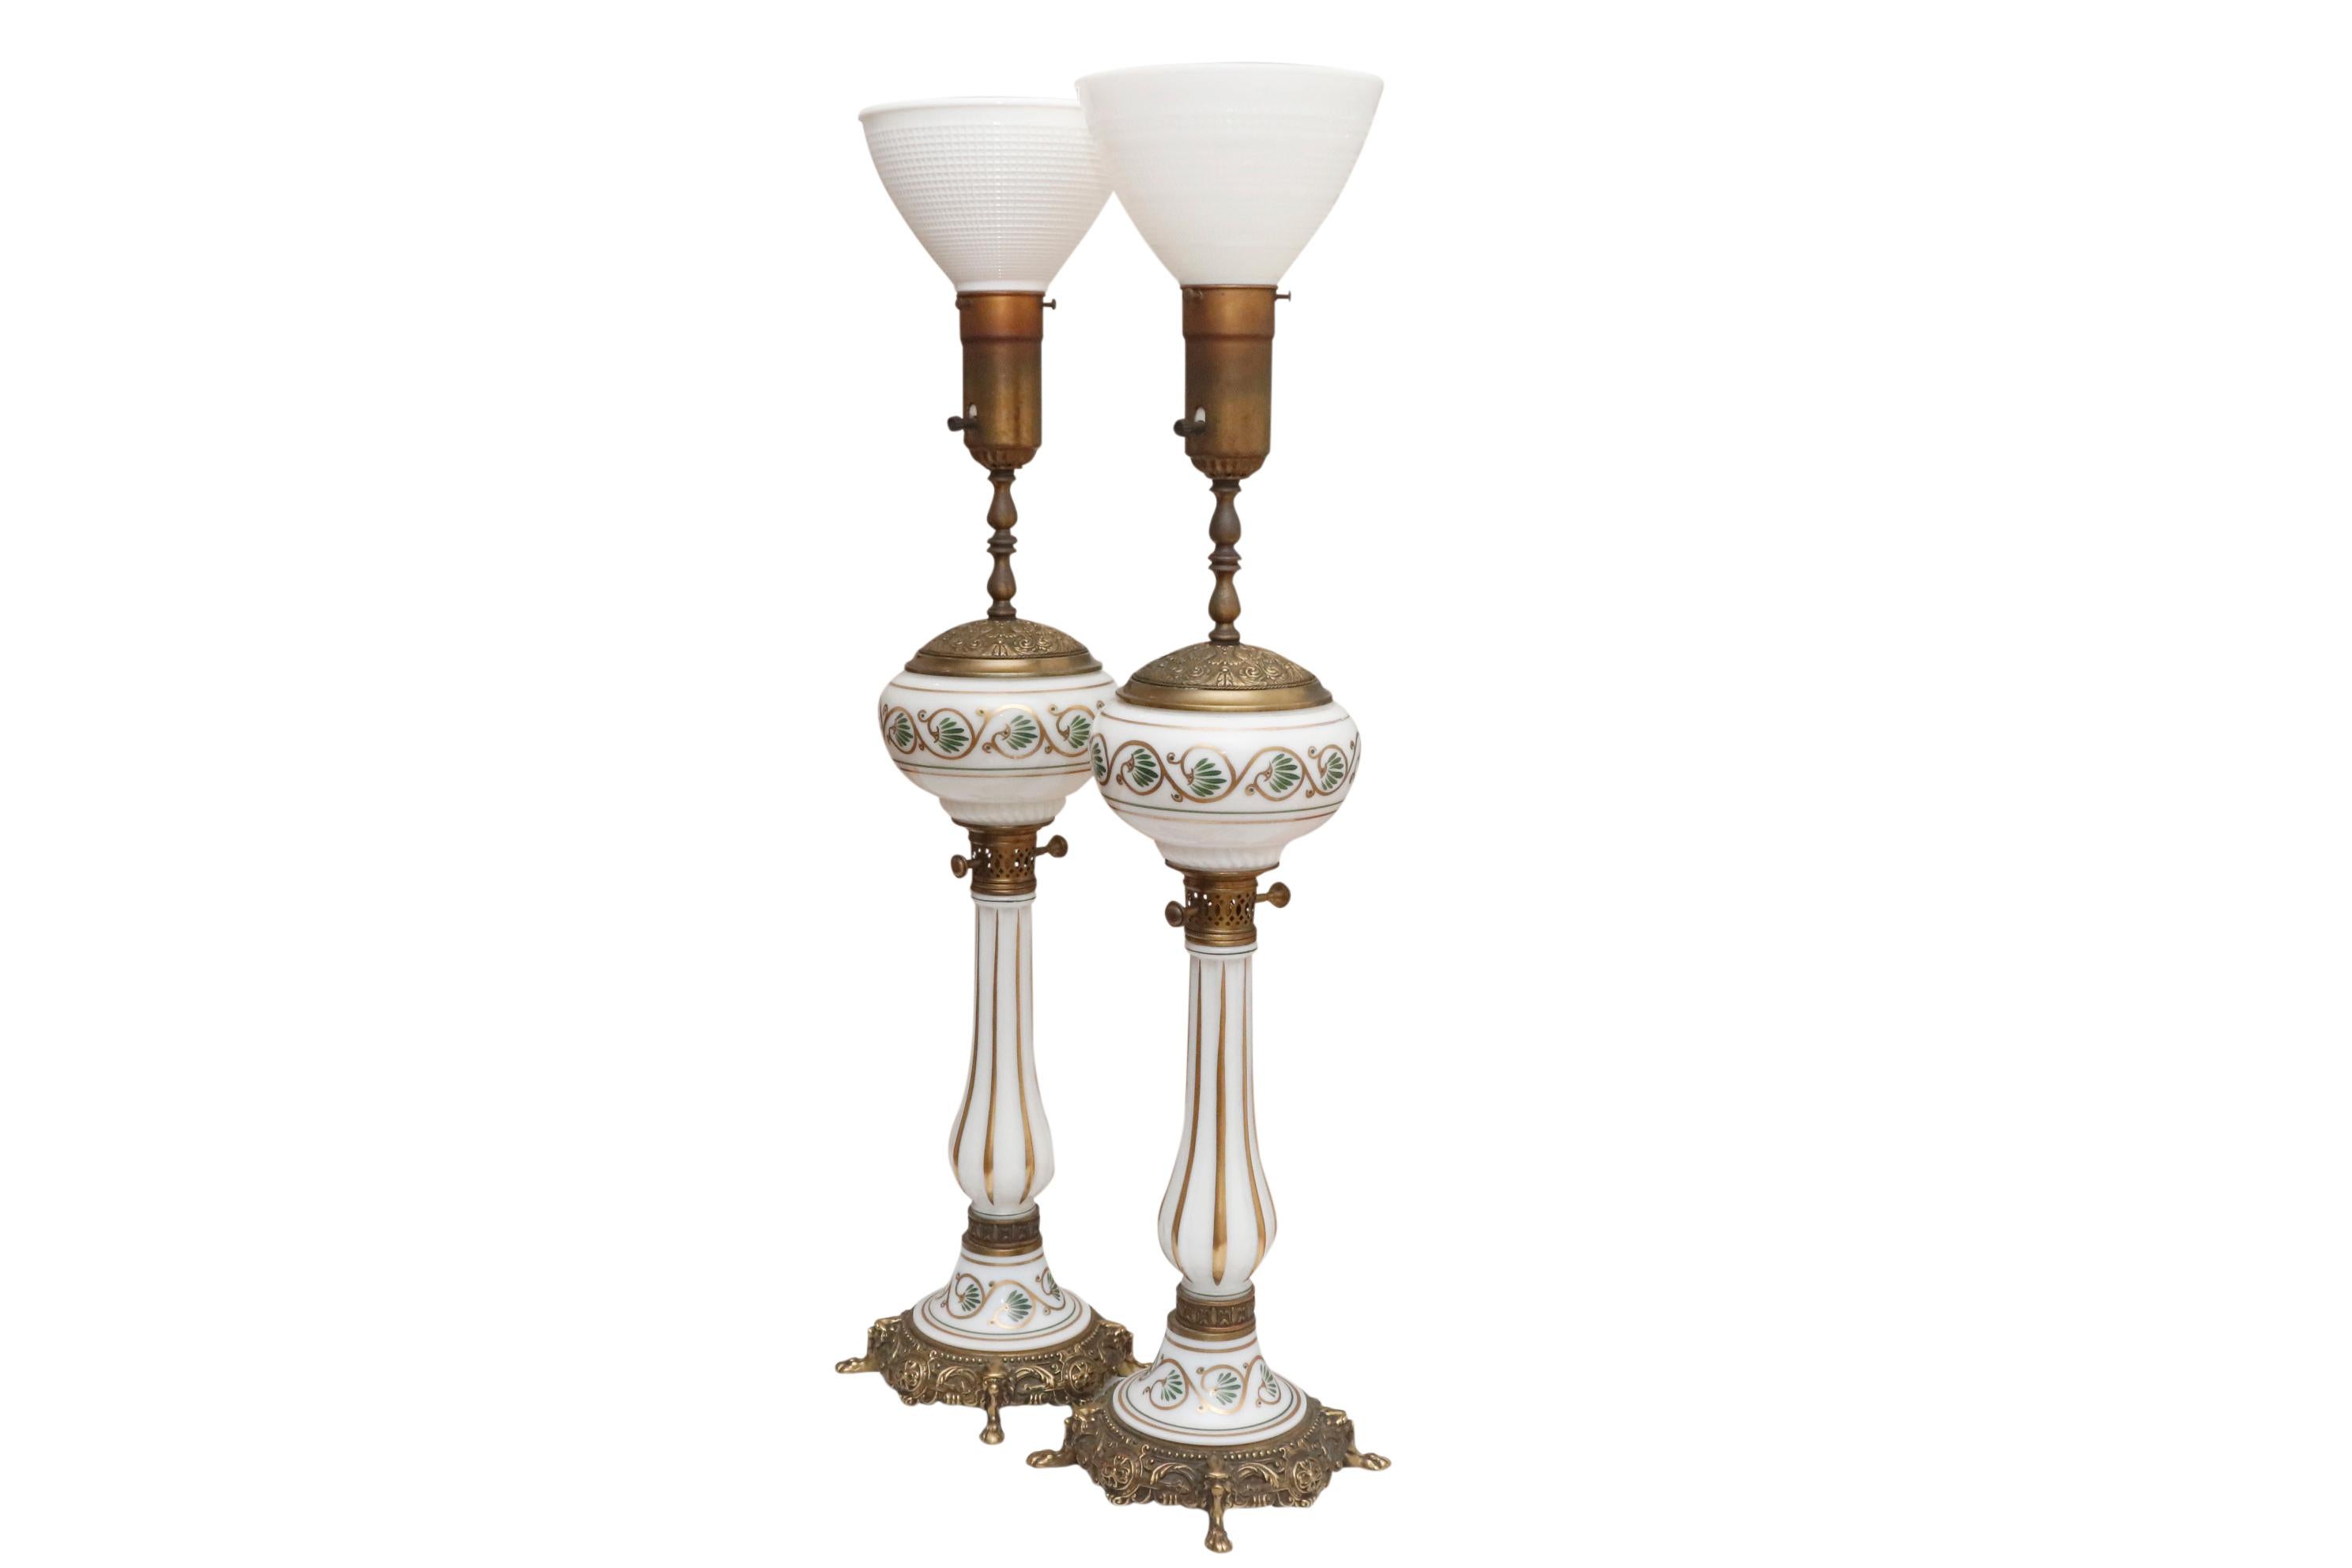 A pair of monumental neoclassical brass and glass uplighter lamps. Torchiere milk glass shades sit on turned brass columns above richly pressed vase tops. Glass vases are hand painted with a simple gold scroll with leaf motif repeated above brass